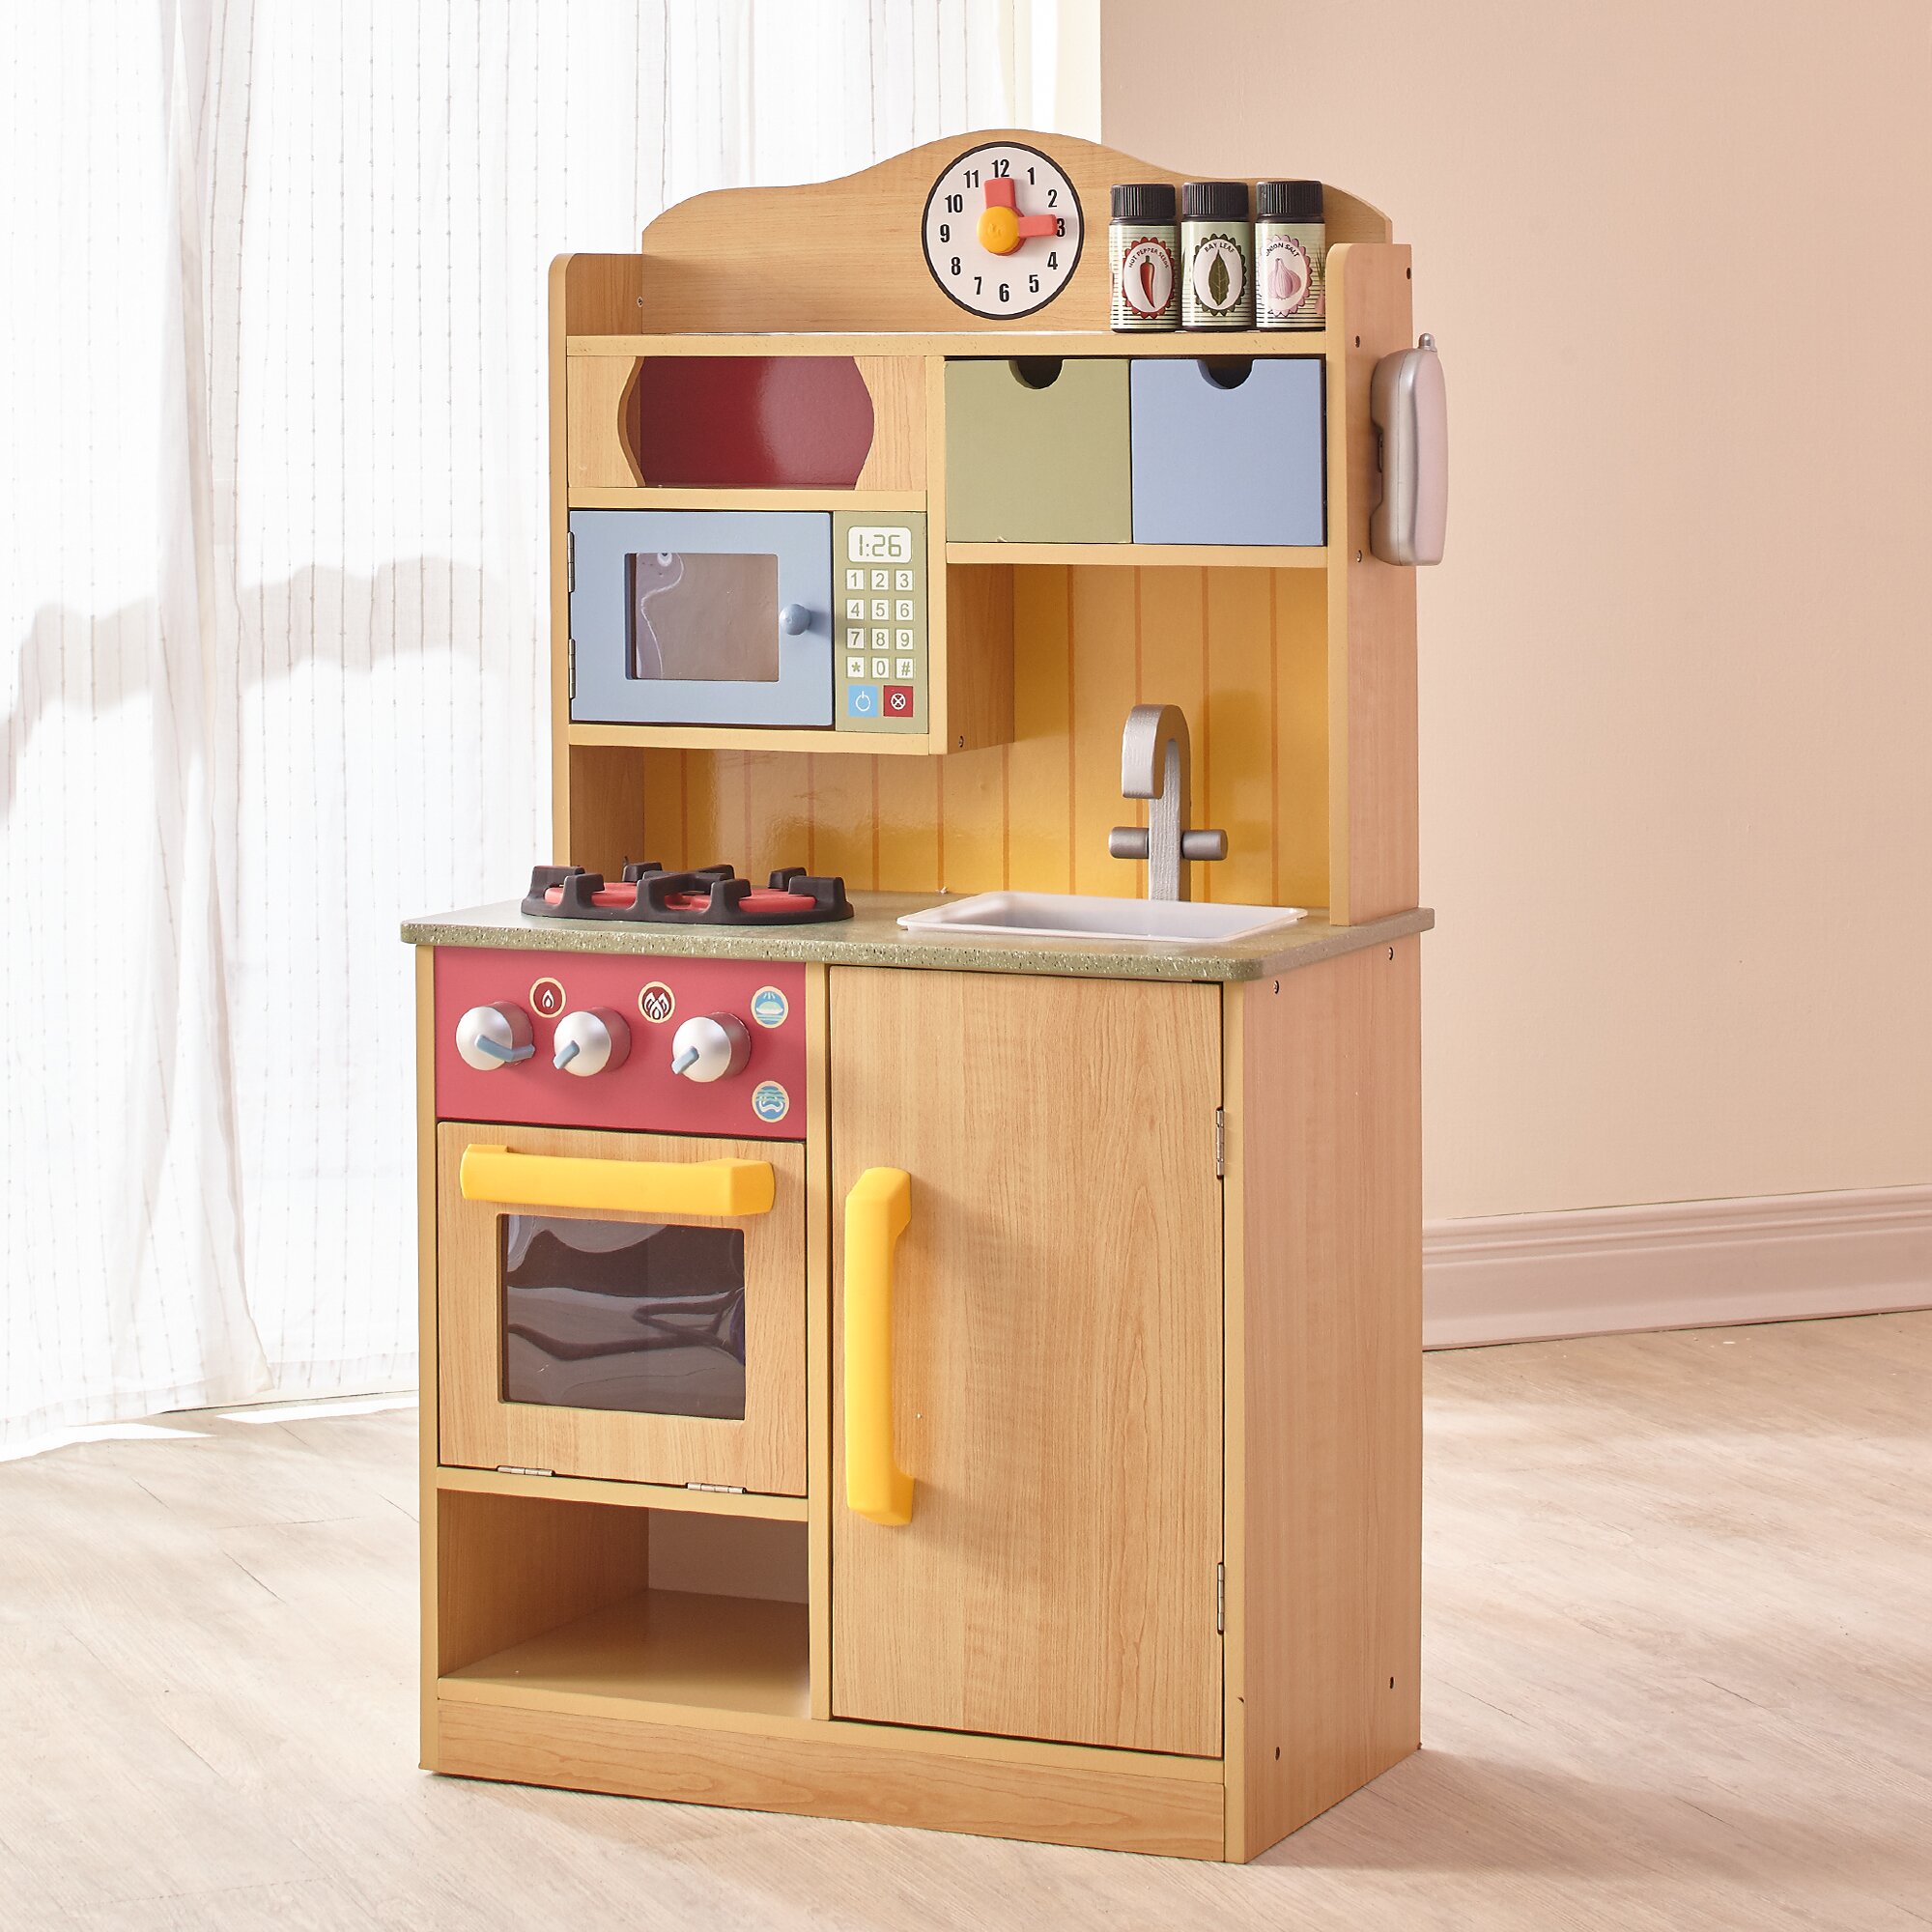 Teamson Kids Little Chef Wooden Play Kitchen with Accessories & Reviews | Wayfair